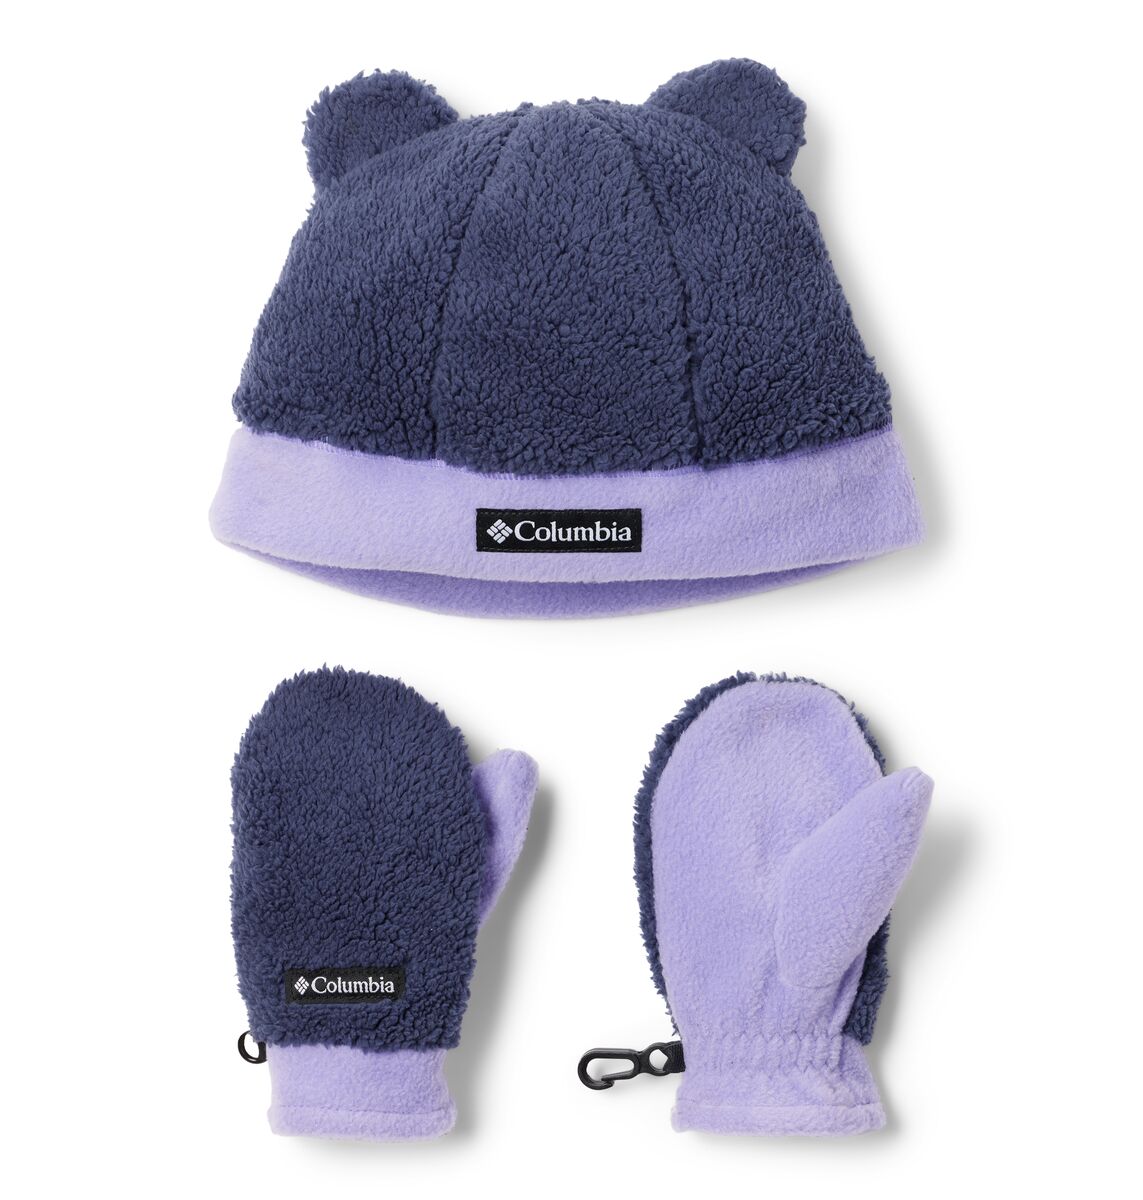 Toddler Rugged Ridge Beanie and Mitten Set in Nocturnal/Paisley Purple